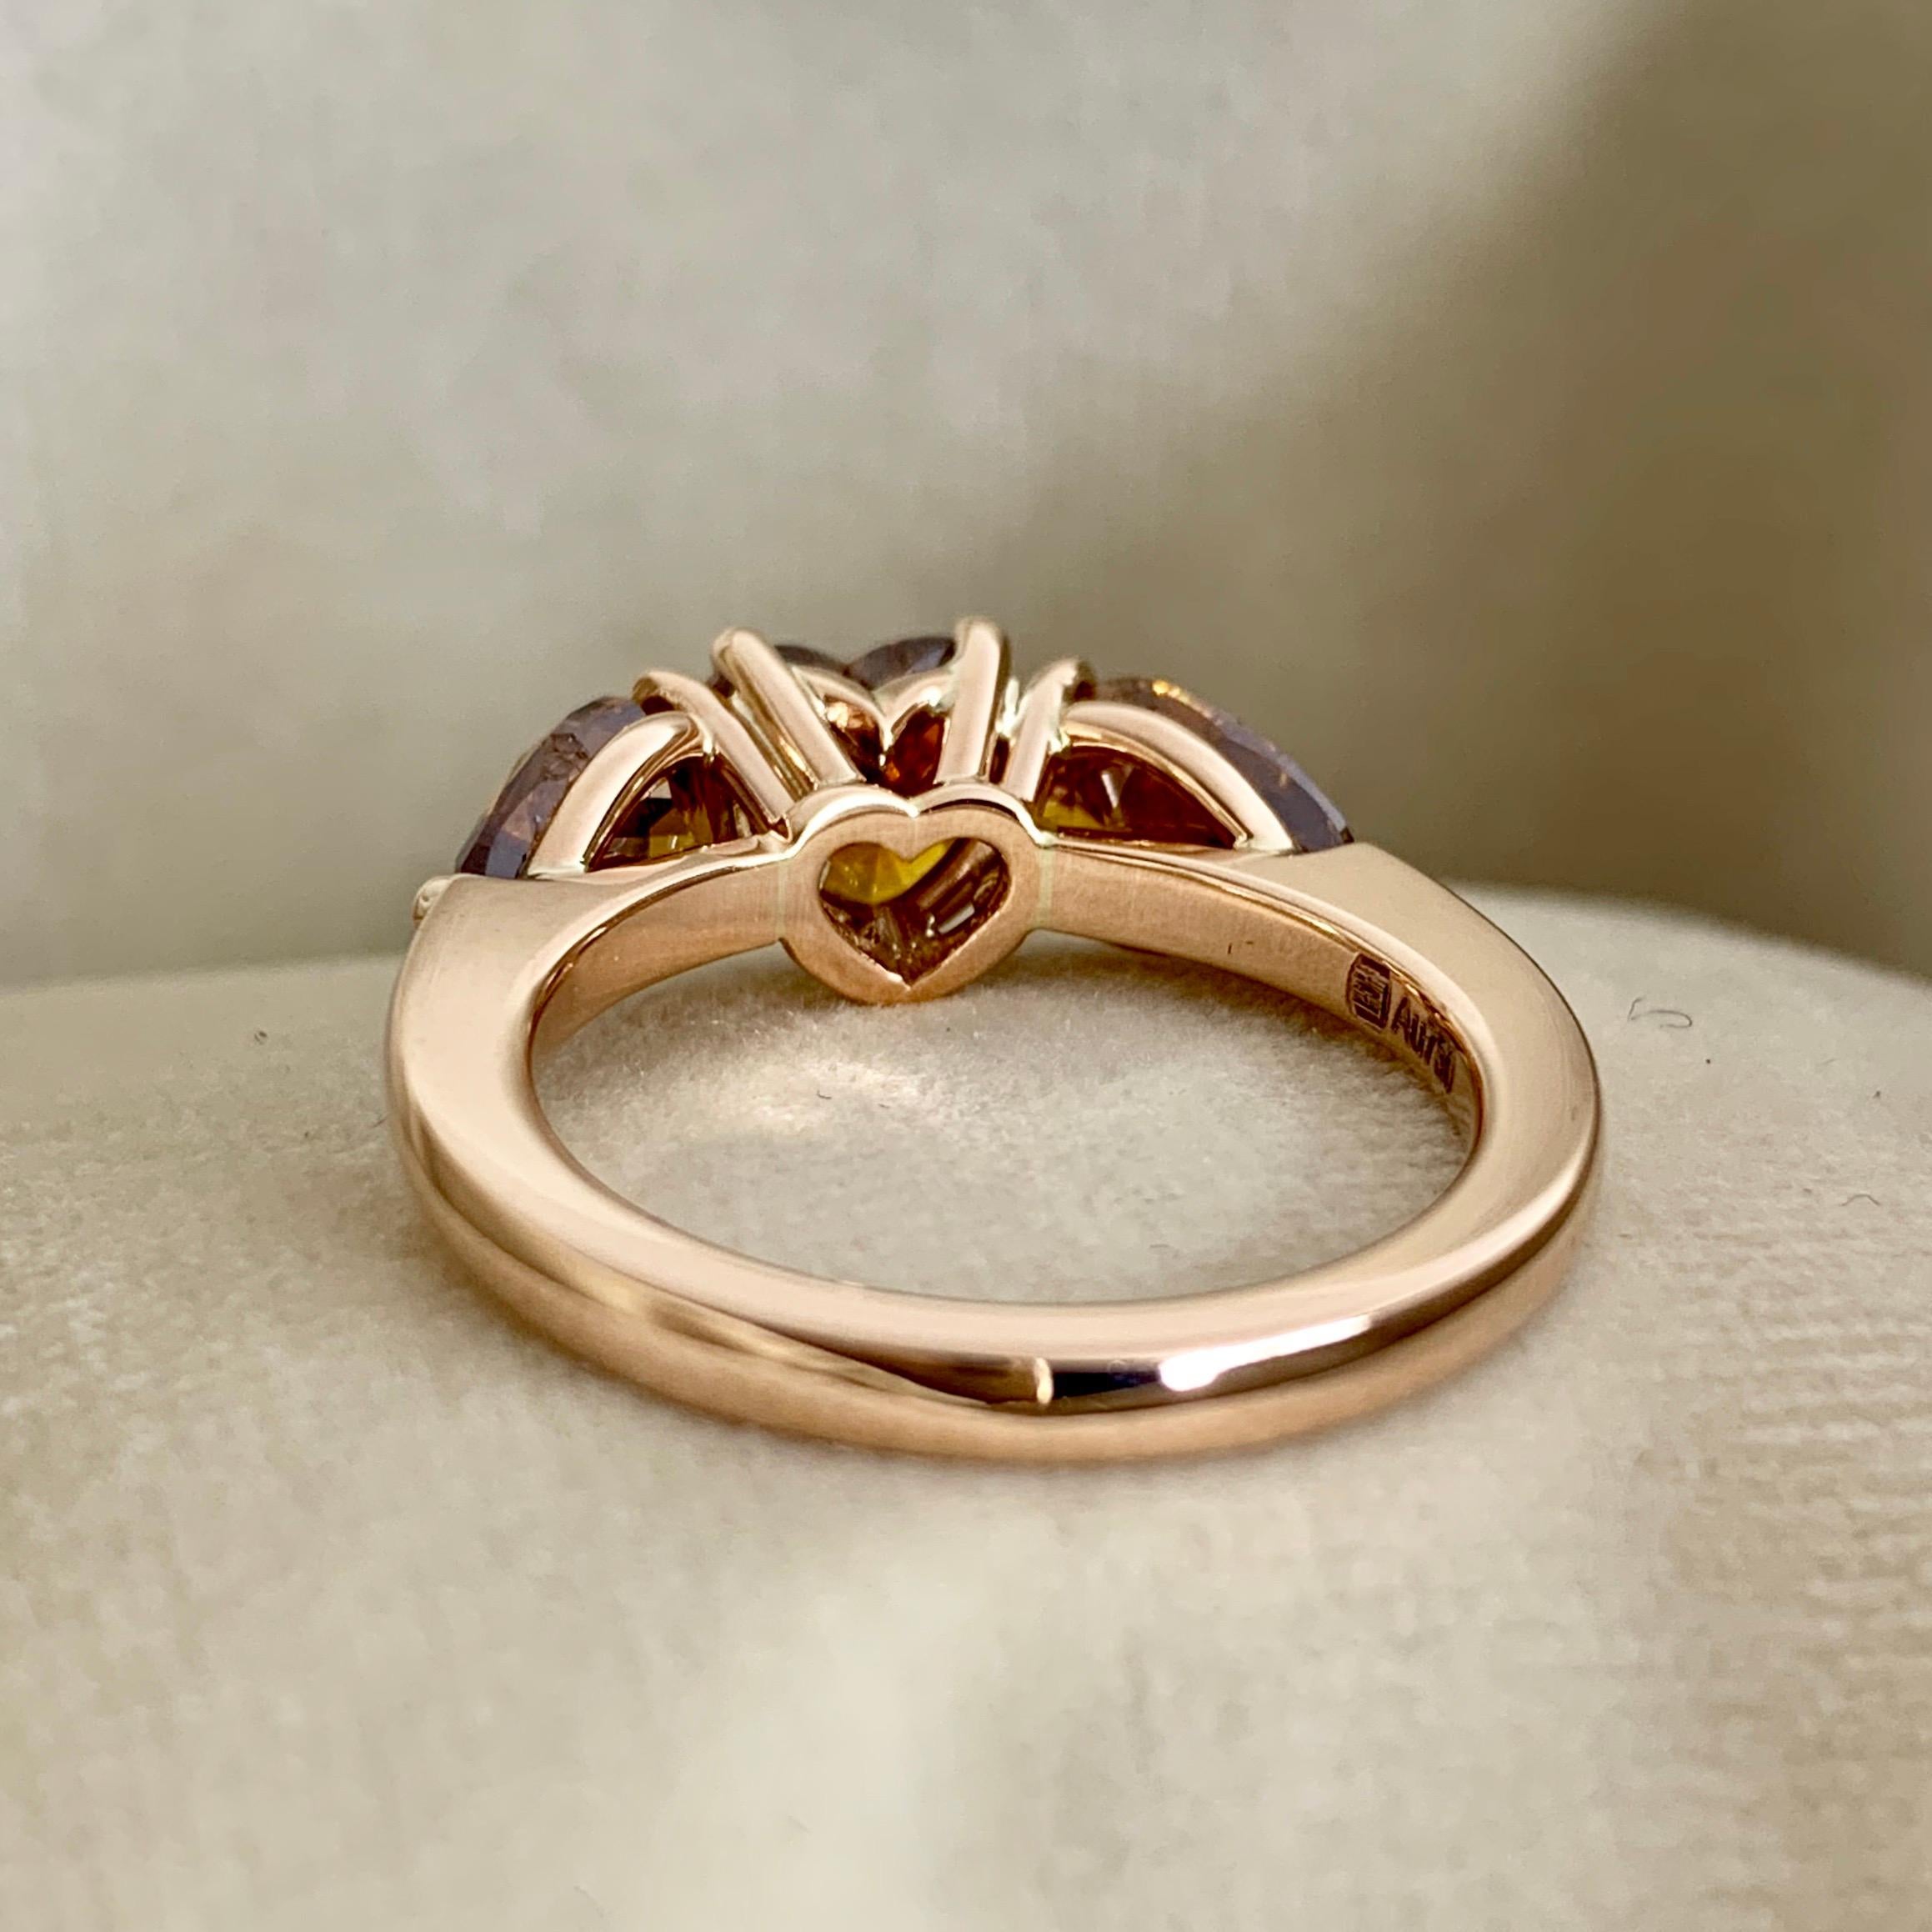 18 carat gold ring with 3 diamonds